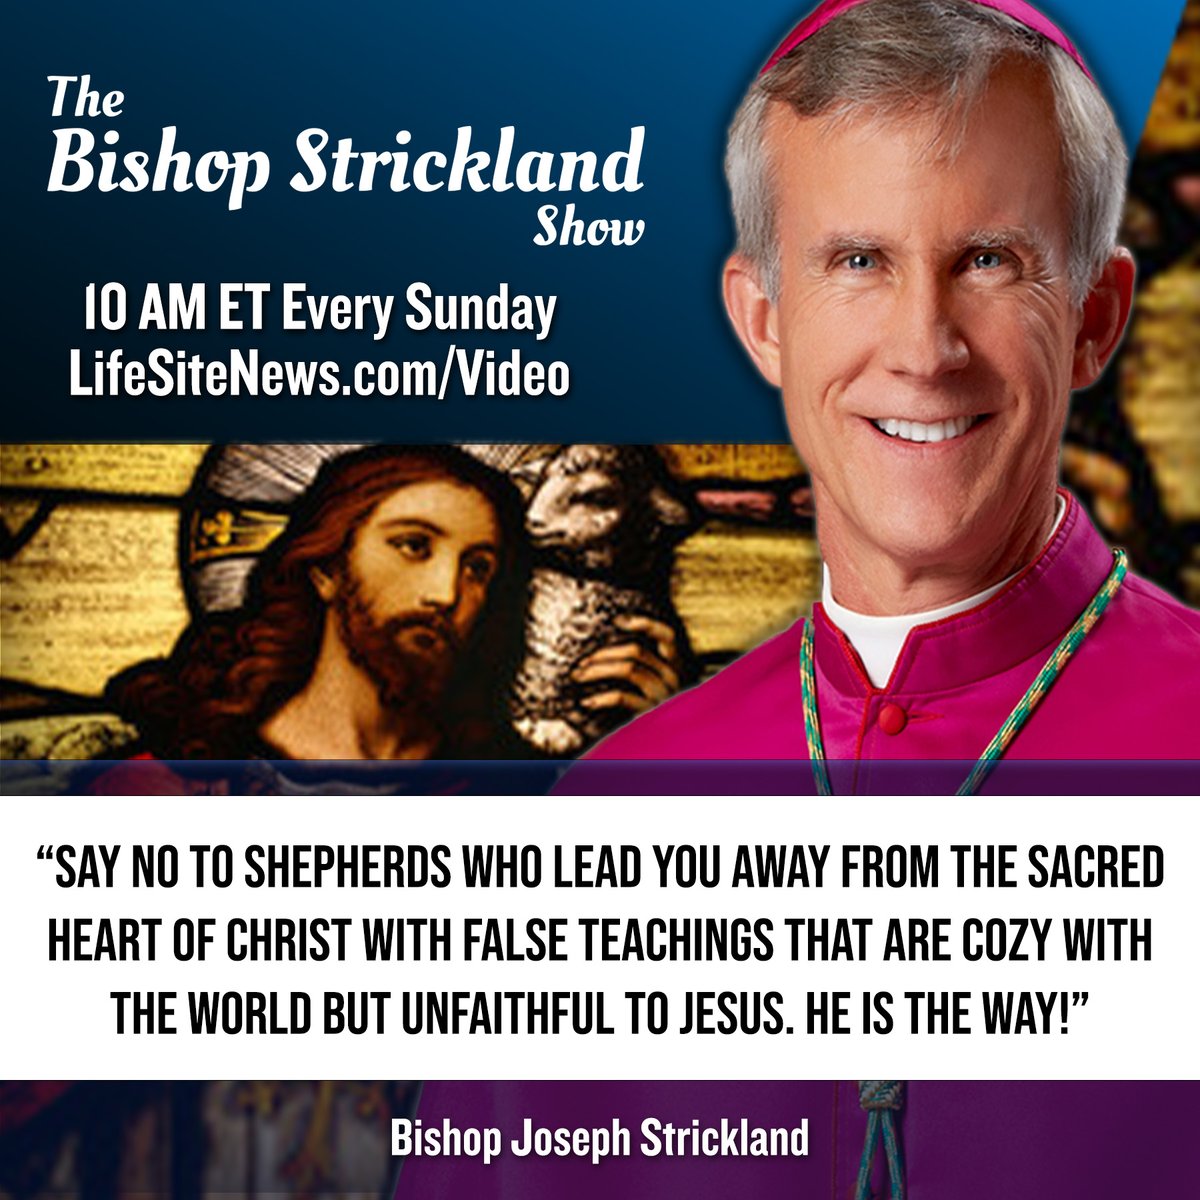 'Say no to shepherds who lead you away from the Sacred Heart of Christ with false teachings that are cozy with the world but unfaithful to Jesus. He is the Way!' - @BishStrickland MORE: lifesitenews.com/shows/the-bish… #CatholicX #CatholicTwitter #Catholic #CatholicChurch #Faith